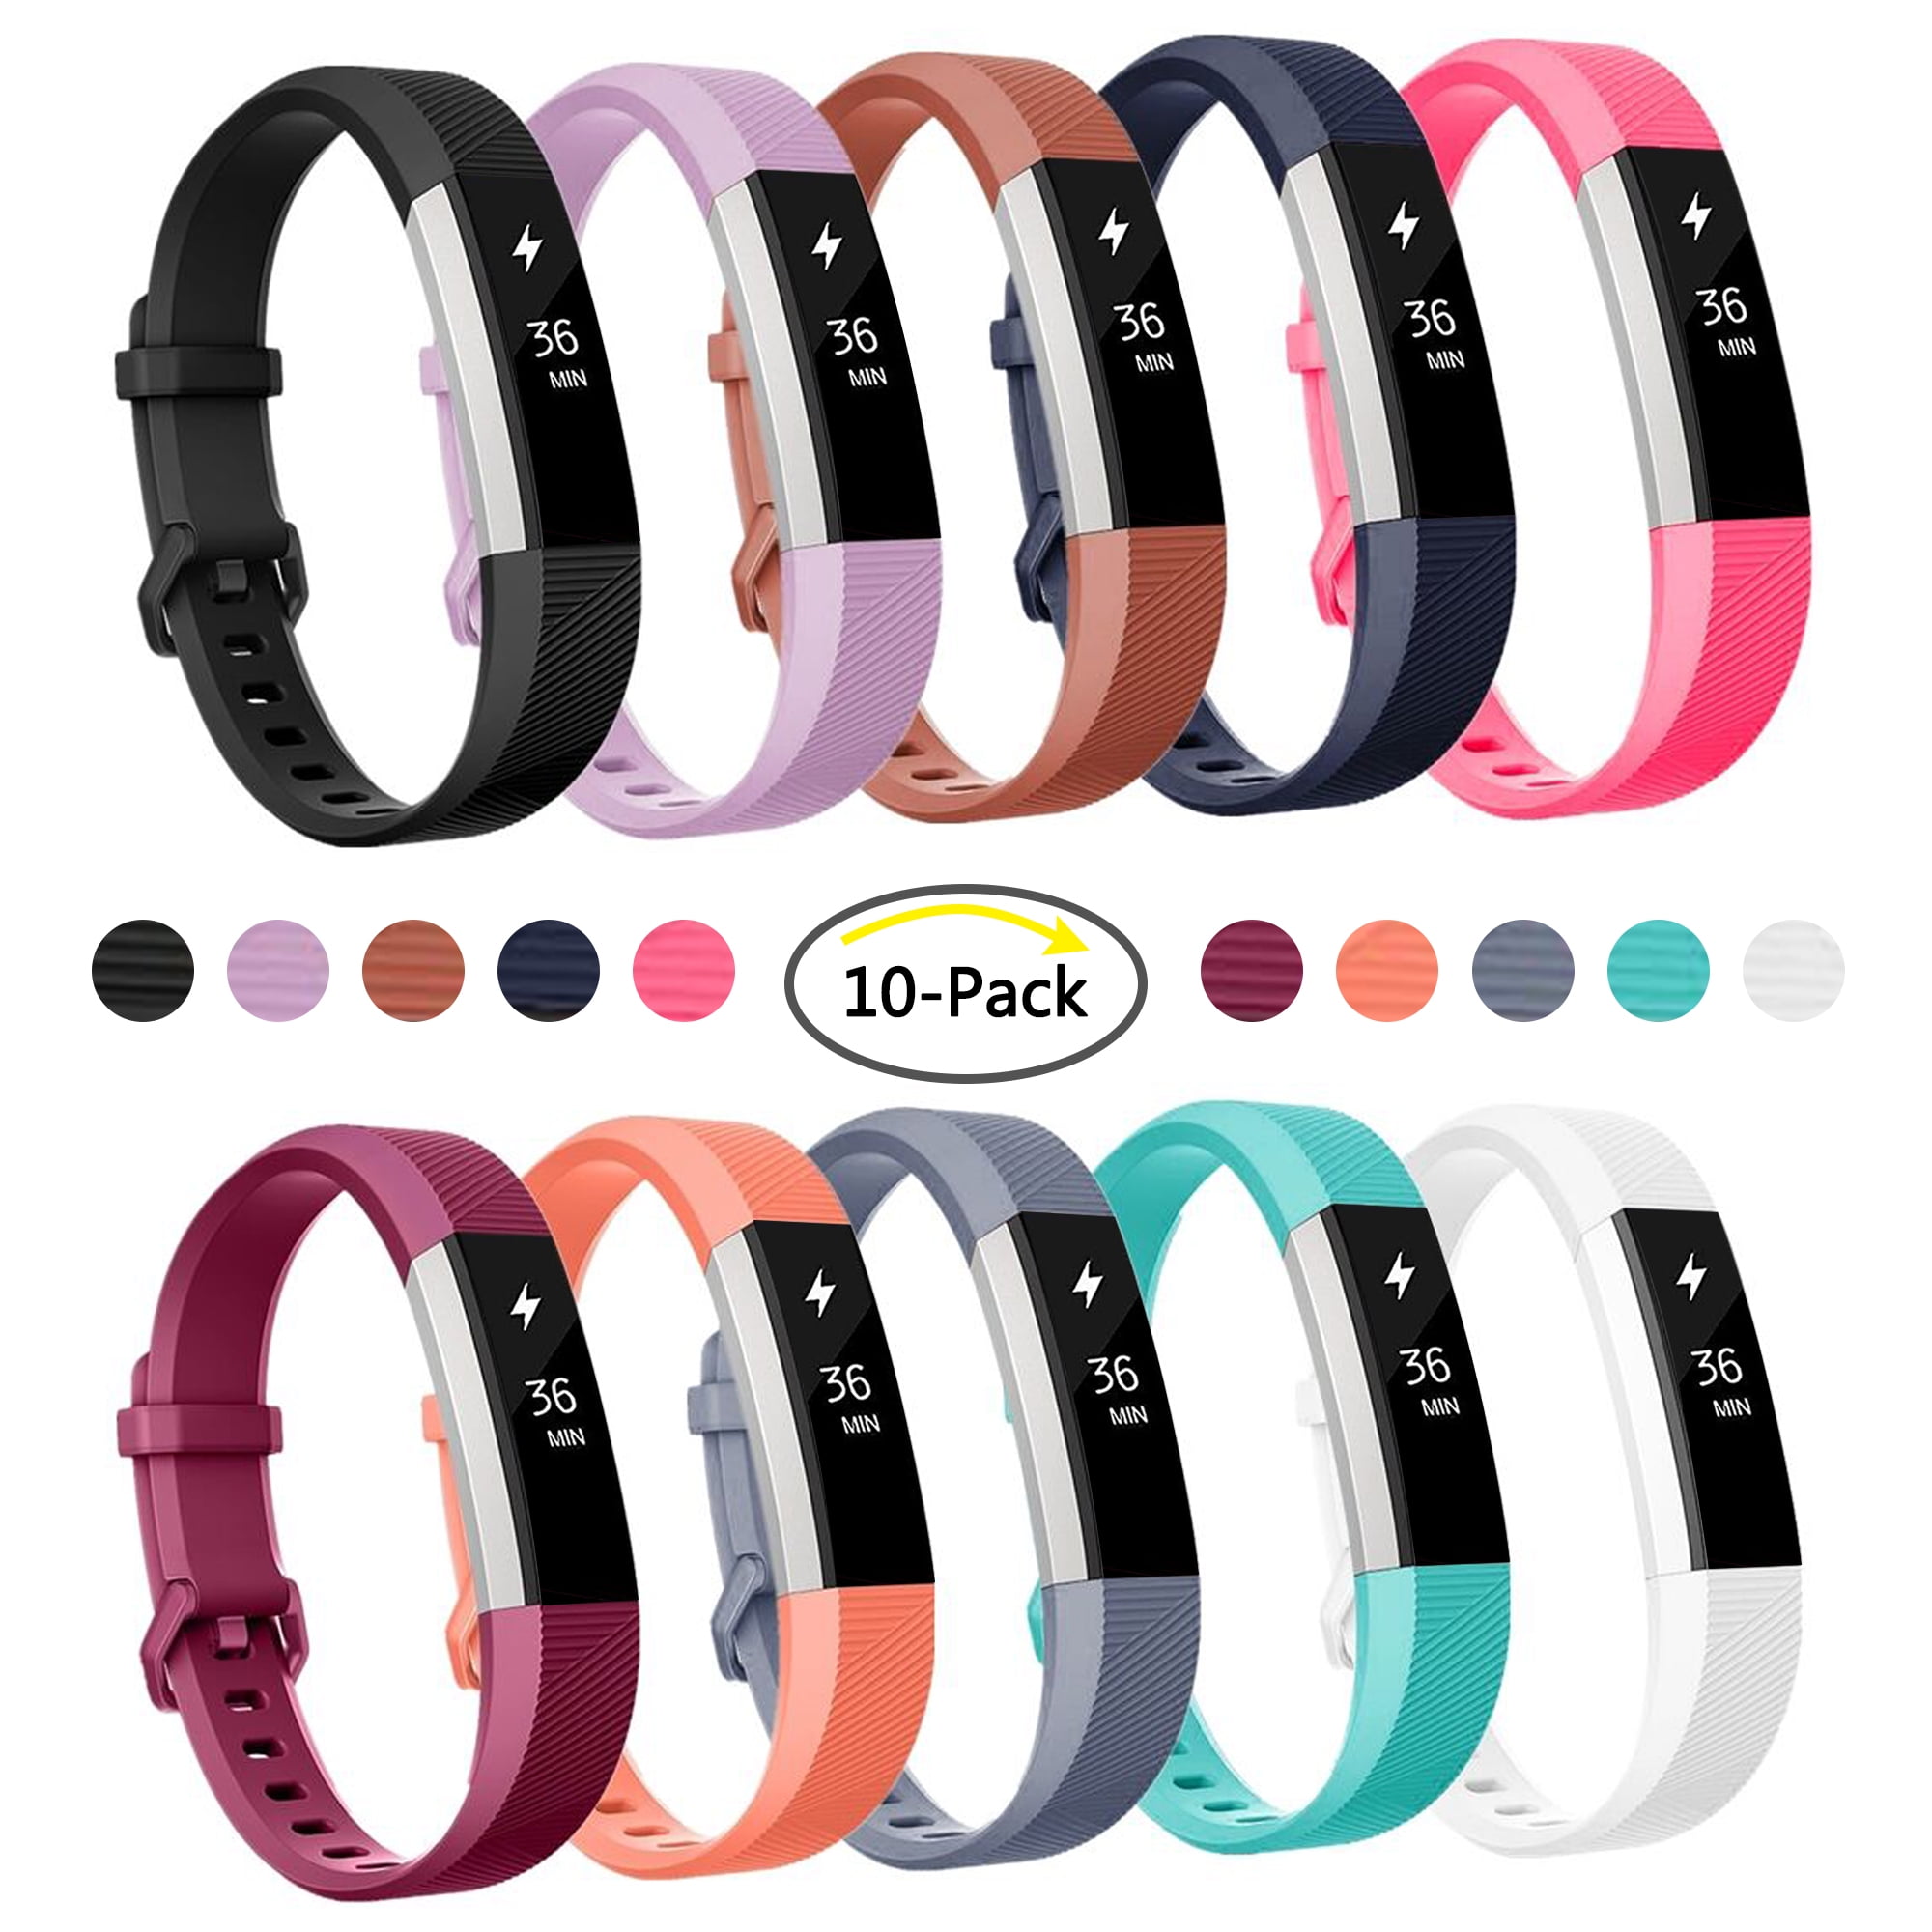 10PK ASSORTED Small-Medium Wristband Band Strap Bracelet For FITBIT ALTA/HR/ACE 